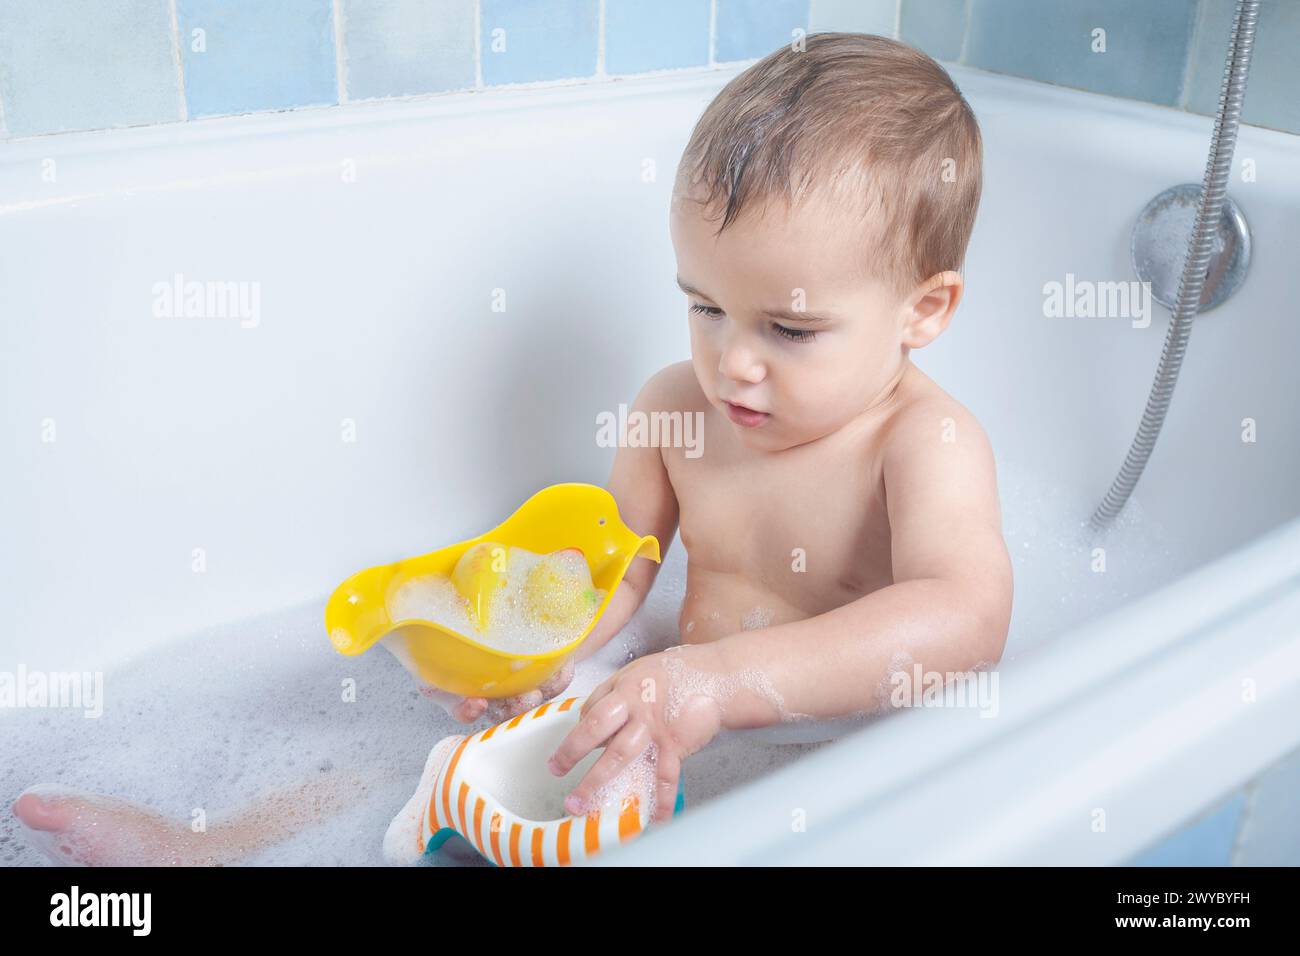 Toddler giggles while playing with bathwater, creating splashes and smiles in the tub. Stock Photo